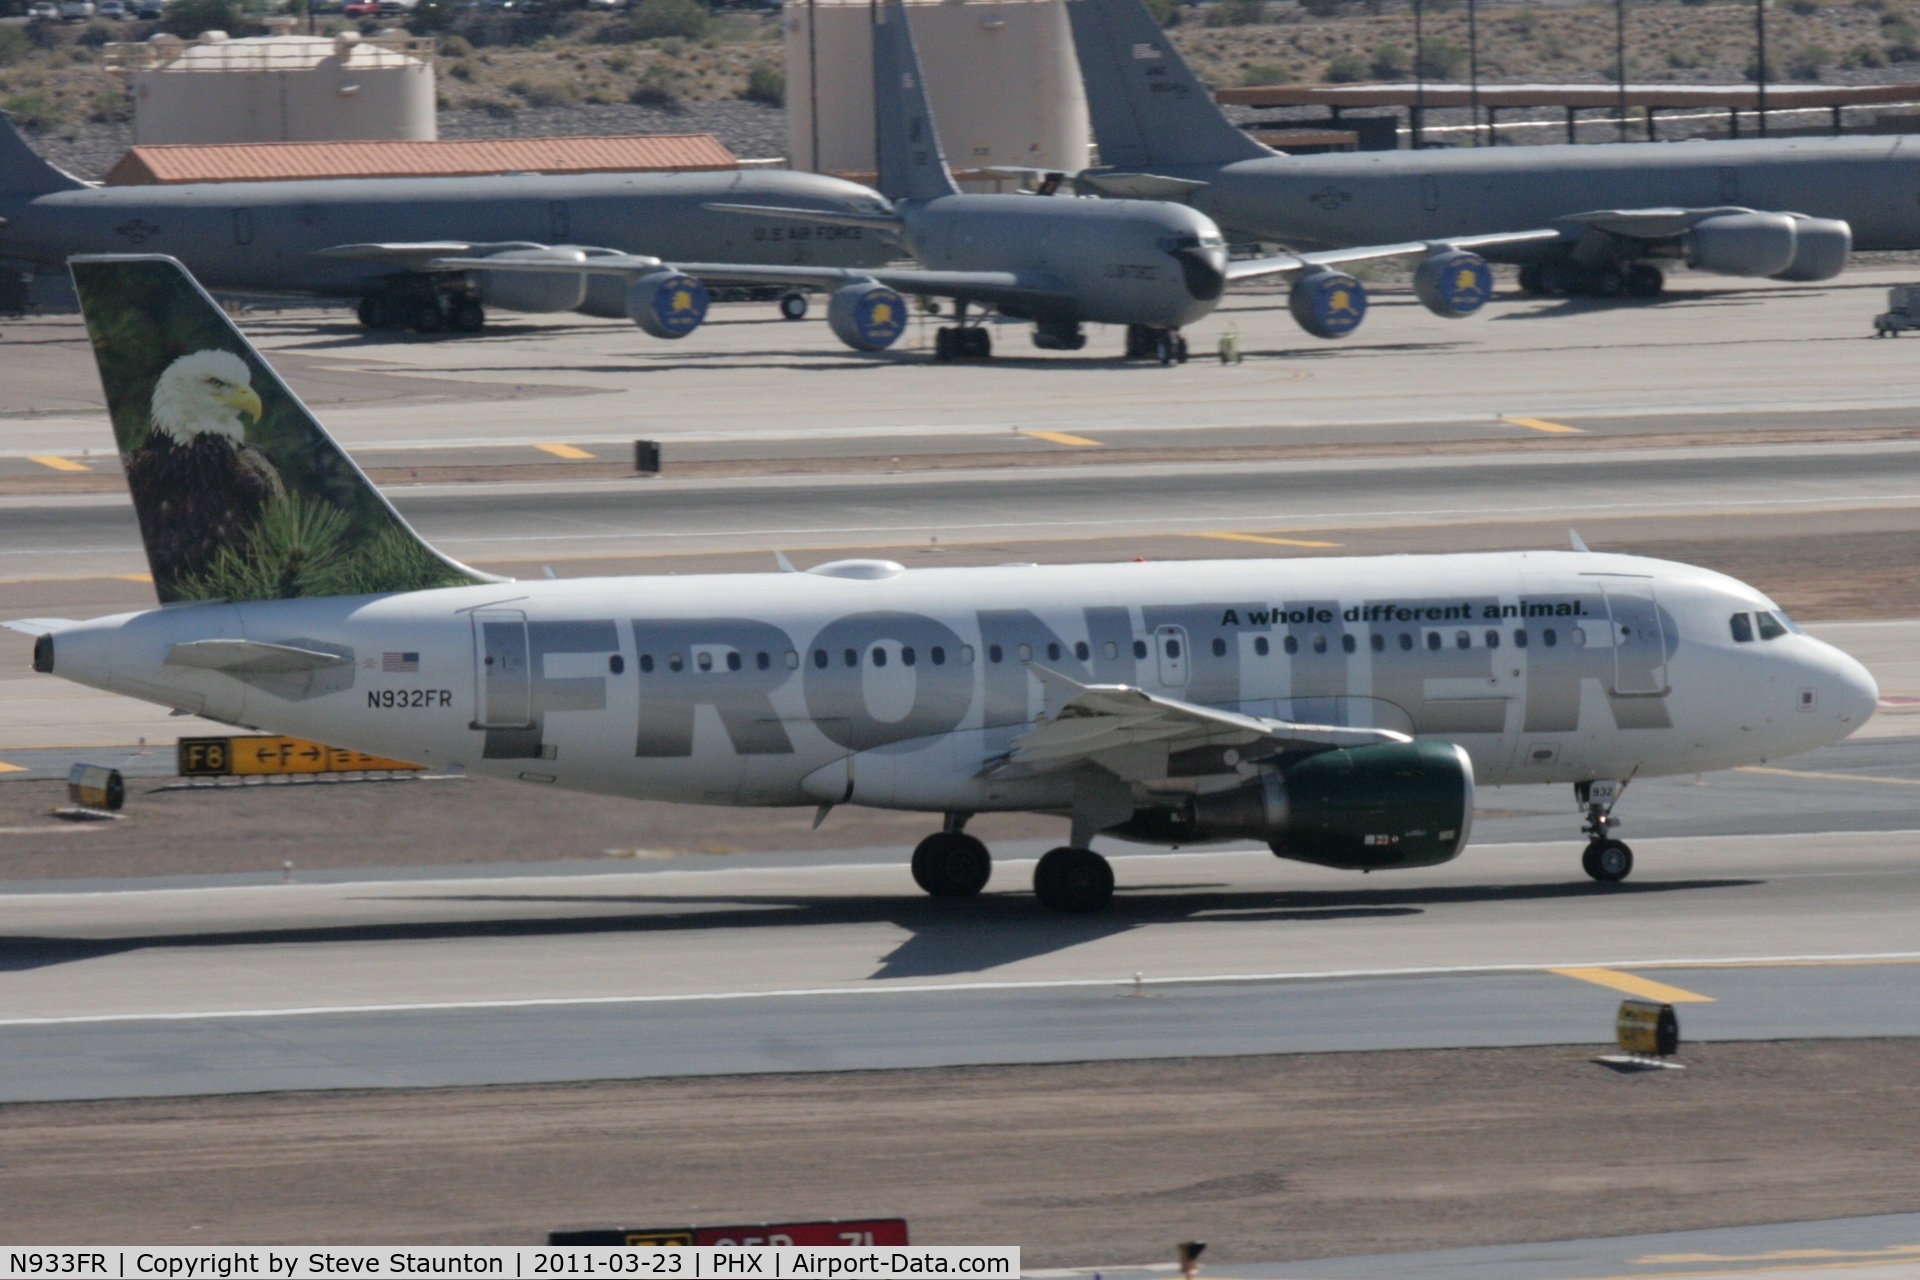 N933FR, 2004 Airbus A319-111 C/N 2260, Taken at Phoenix Sky Harbor Airport, in March 2011 whilst on an Aeroprint Aviation tour